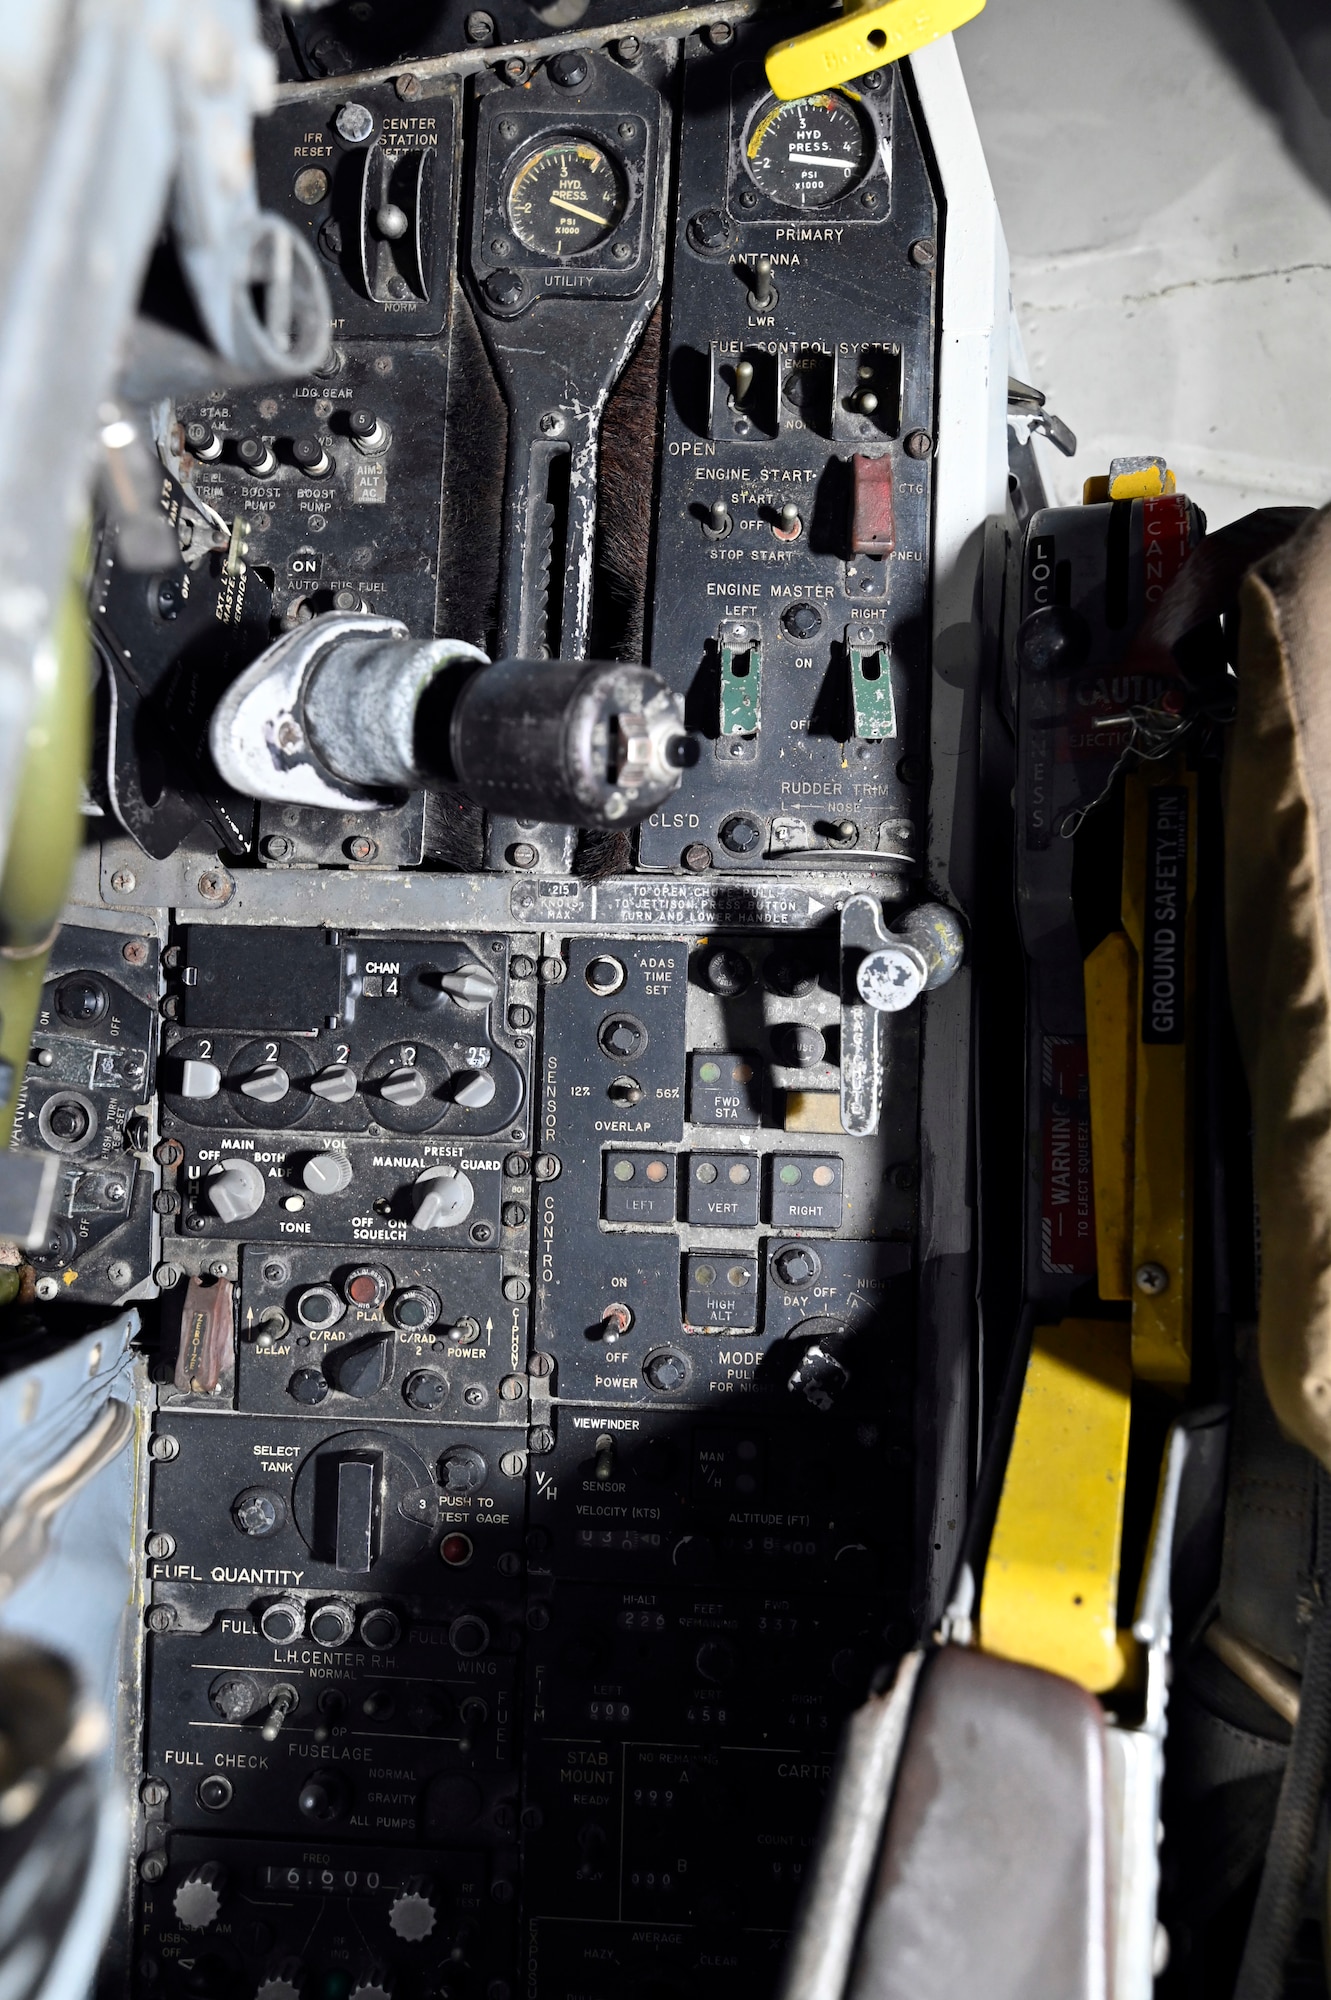 cockpit views of the McDonnell RF-101C Voodoo